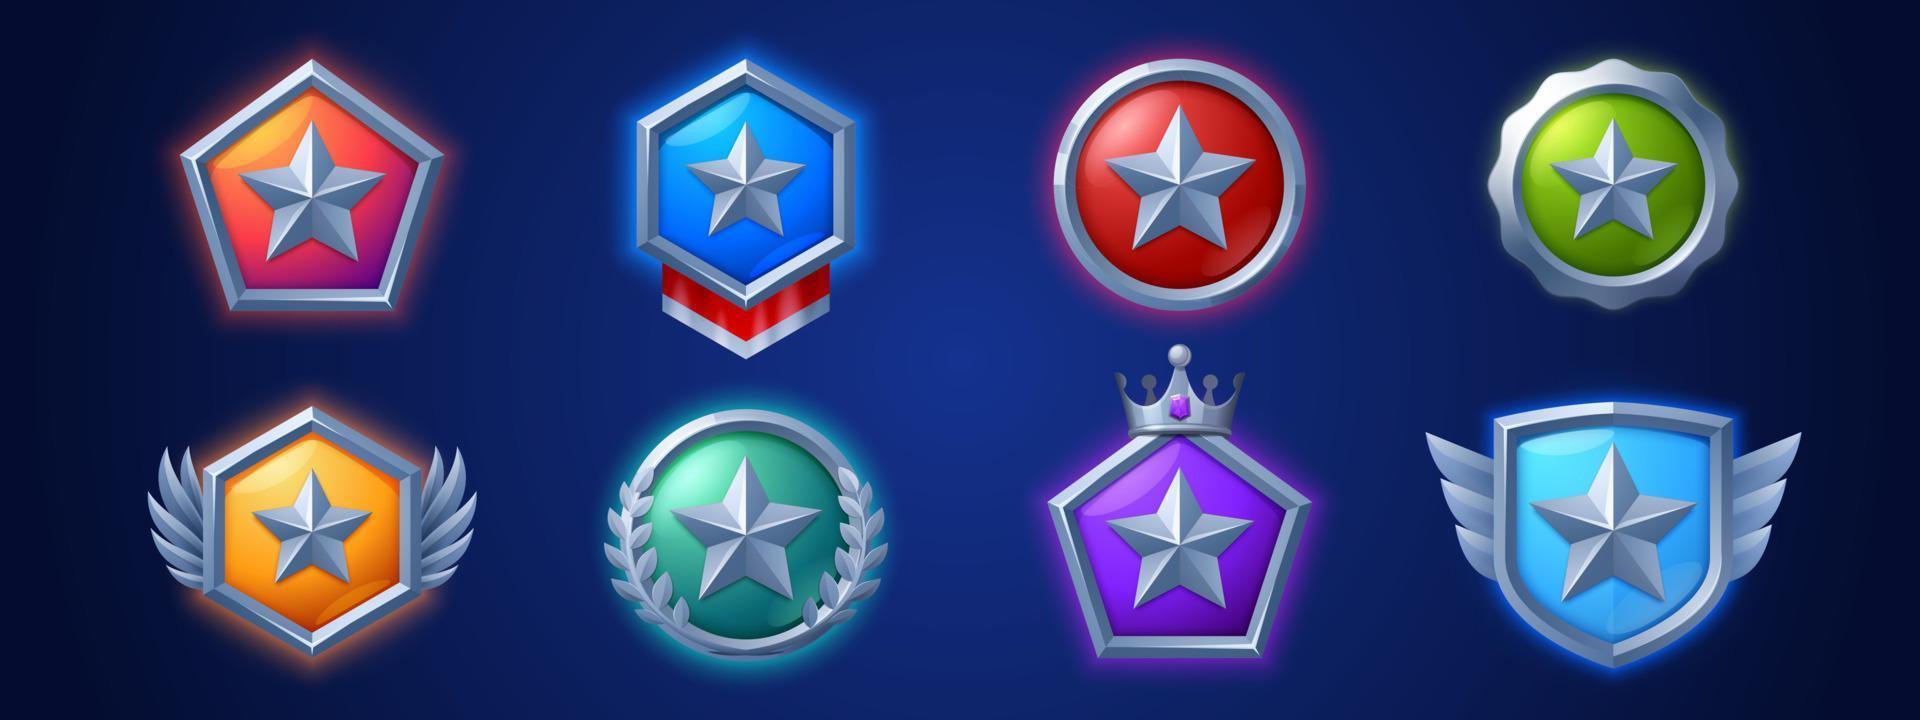 Game level icons, medals, stars, ui badges, trophy vector